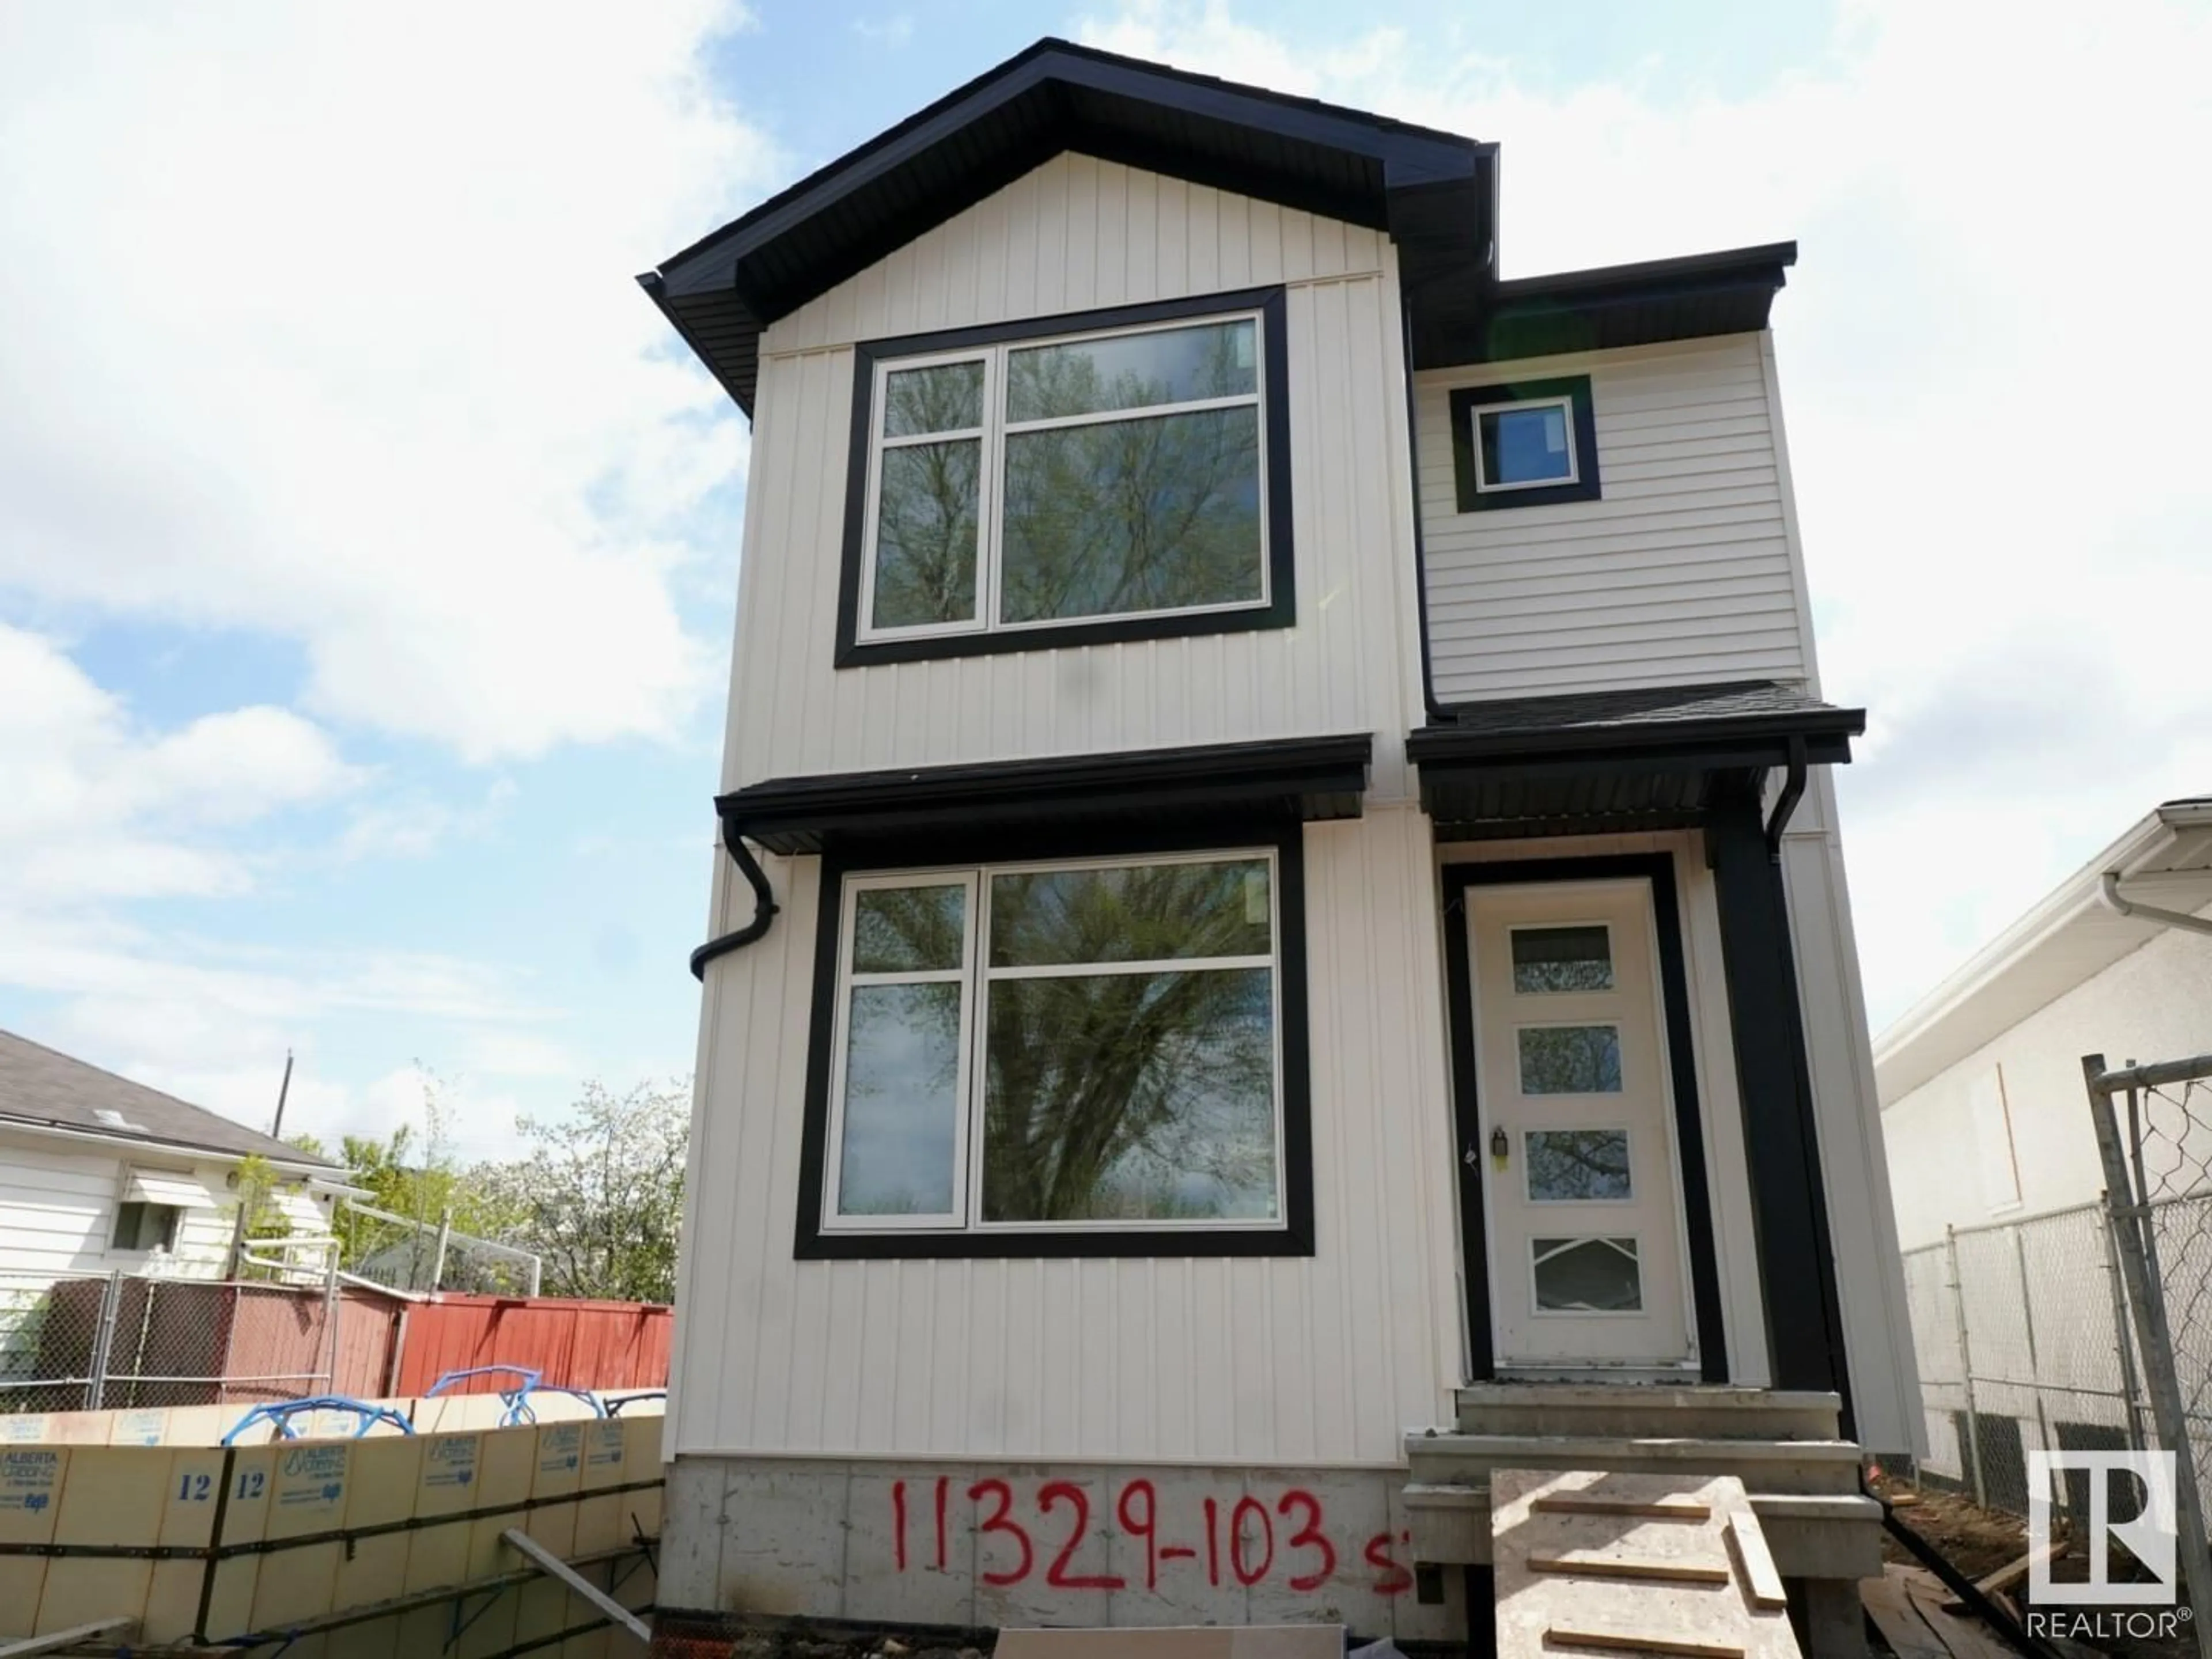 Frontside or backside of a home for 11329 103 ST NW, Edmonton Alberta T5G2H8